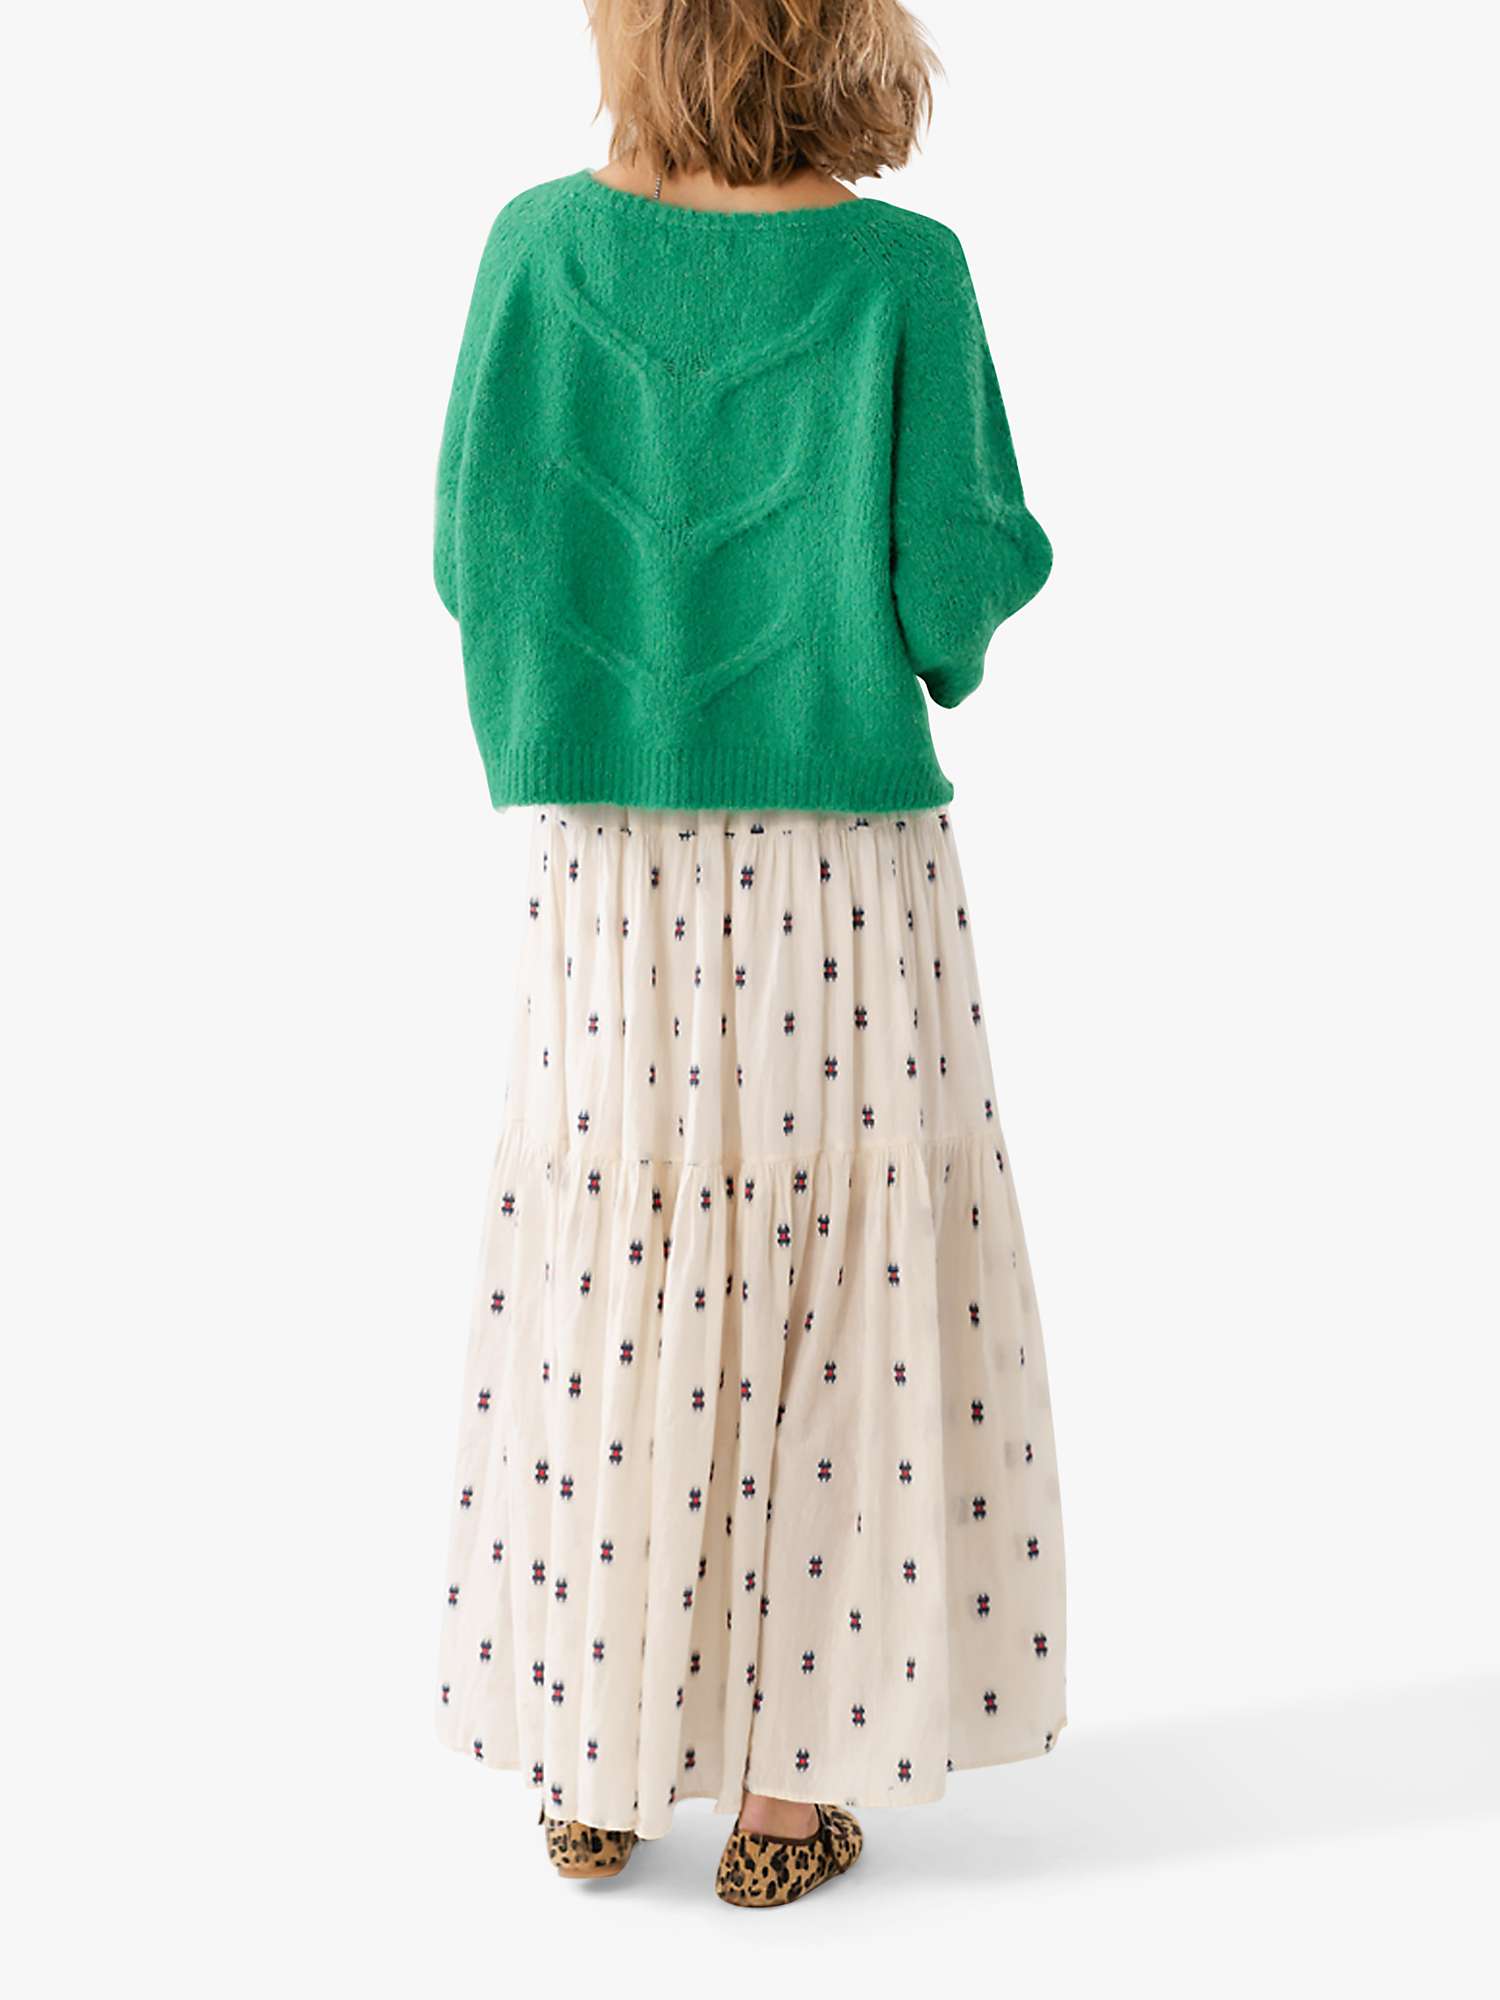 Buy Lollys Laundry Tortuga Relaxed Fit Jumper, Emerald Green Online at johnlewis.com